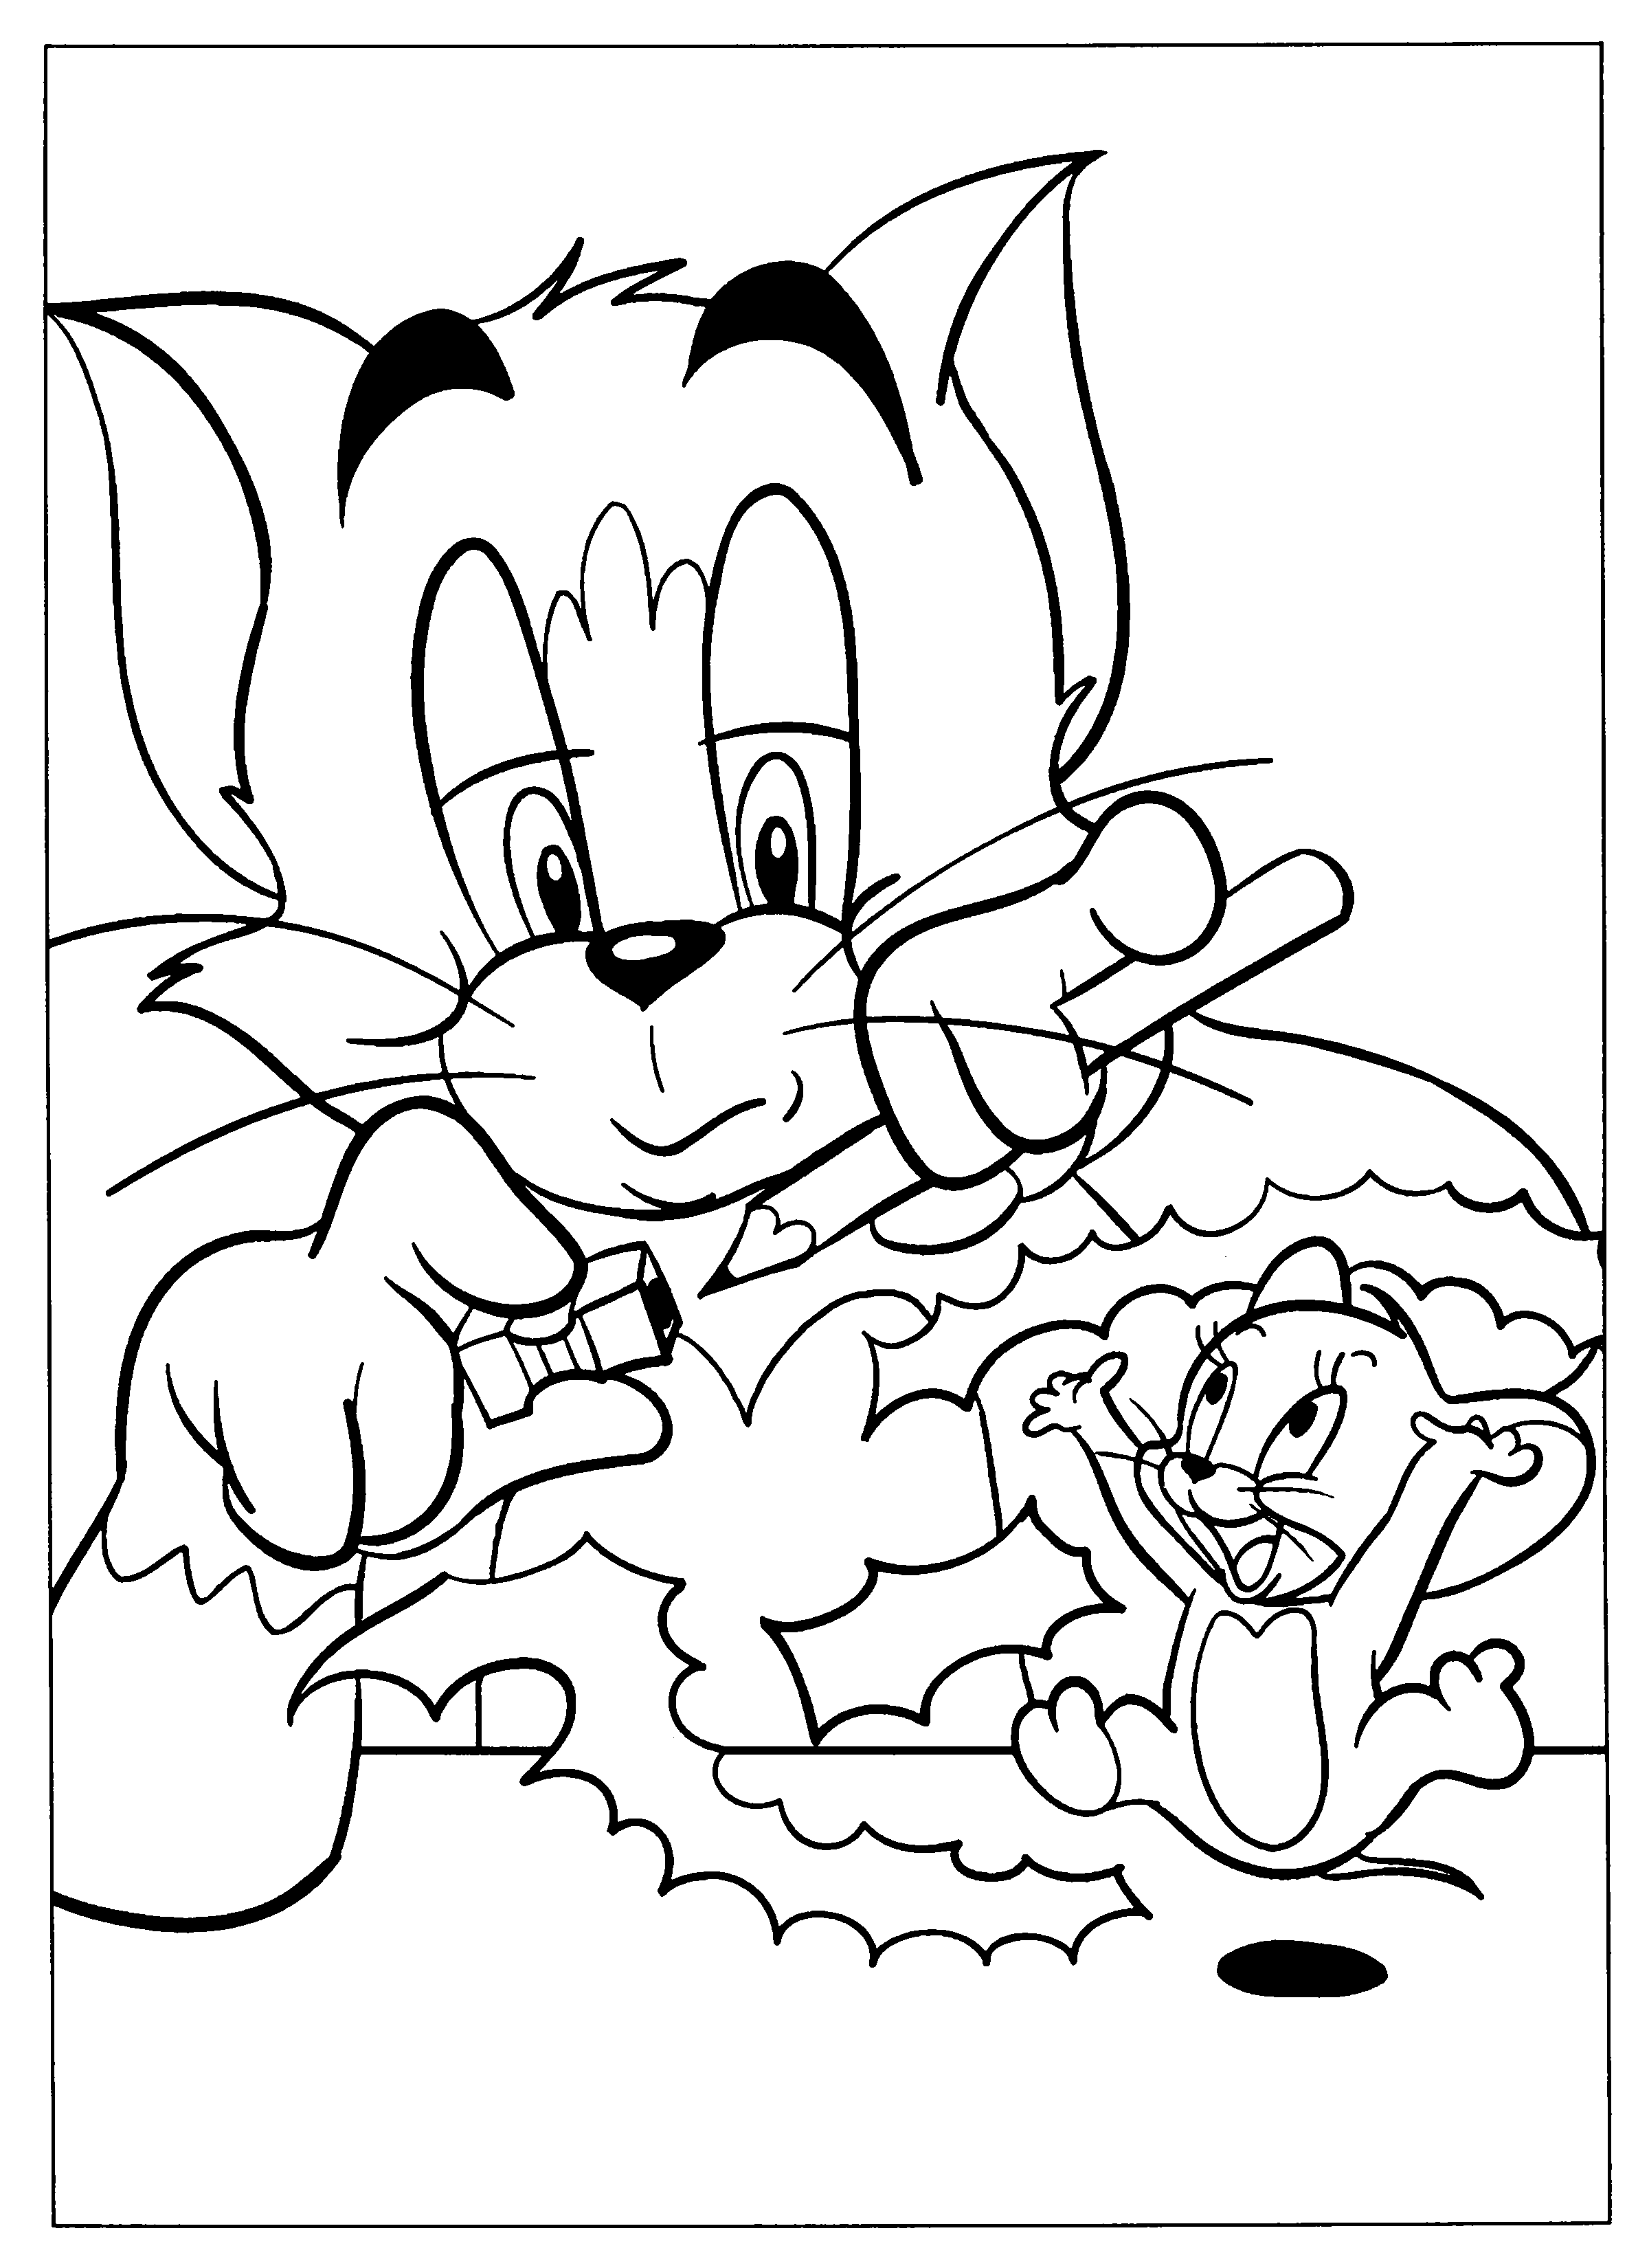 Coloring Page - Tom and jerry coloring pages 5